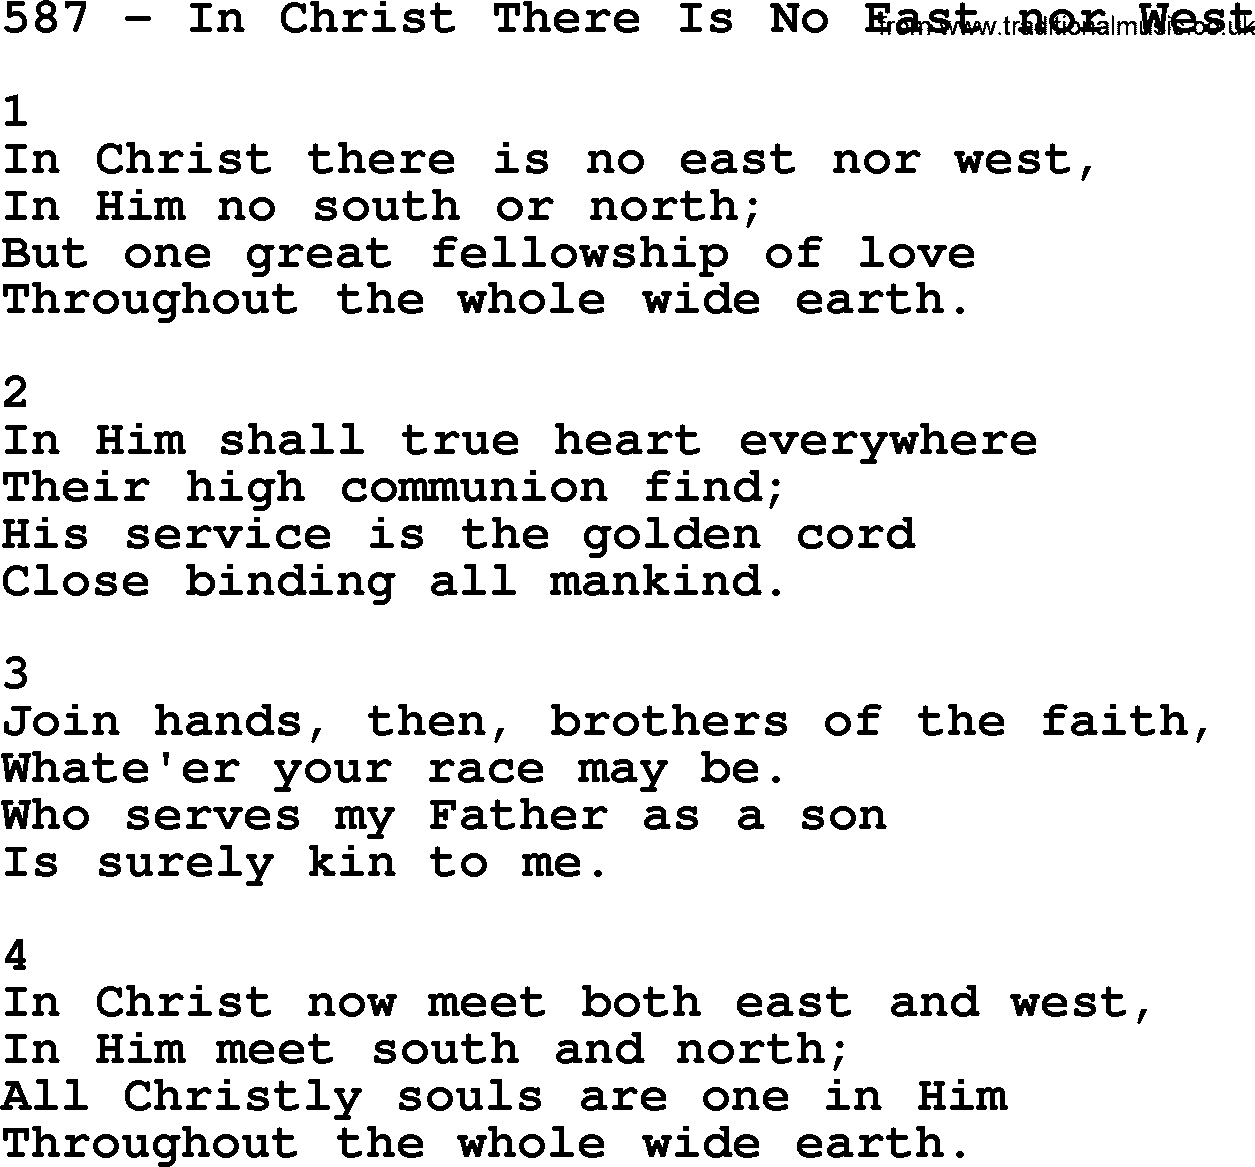 Complete Adventis Hymnal, title: 587-In Christ There Is No East Nor West, with lyrics, midi, mp3, powerpoints(PPT) and PDF,